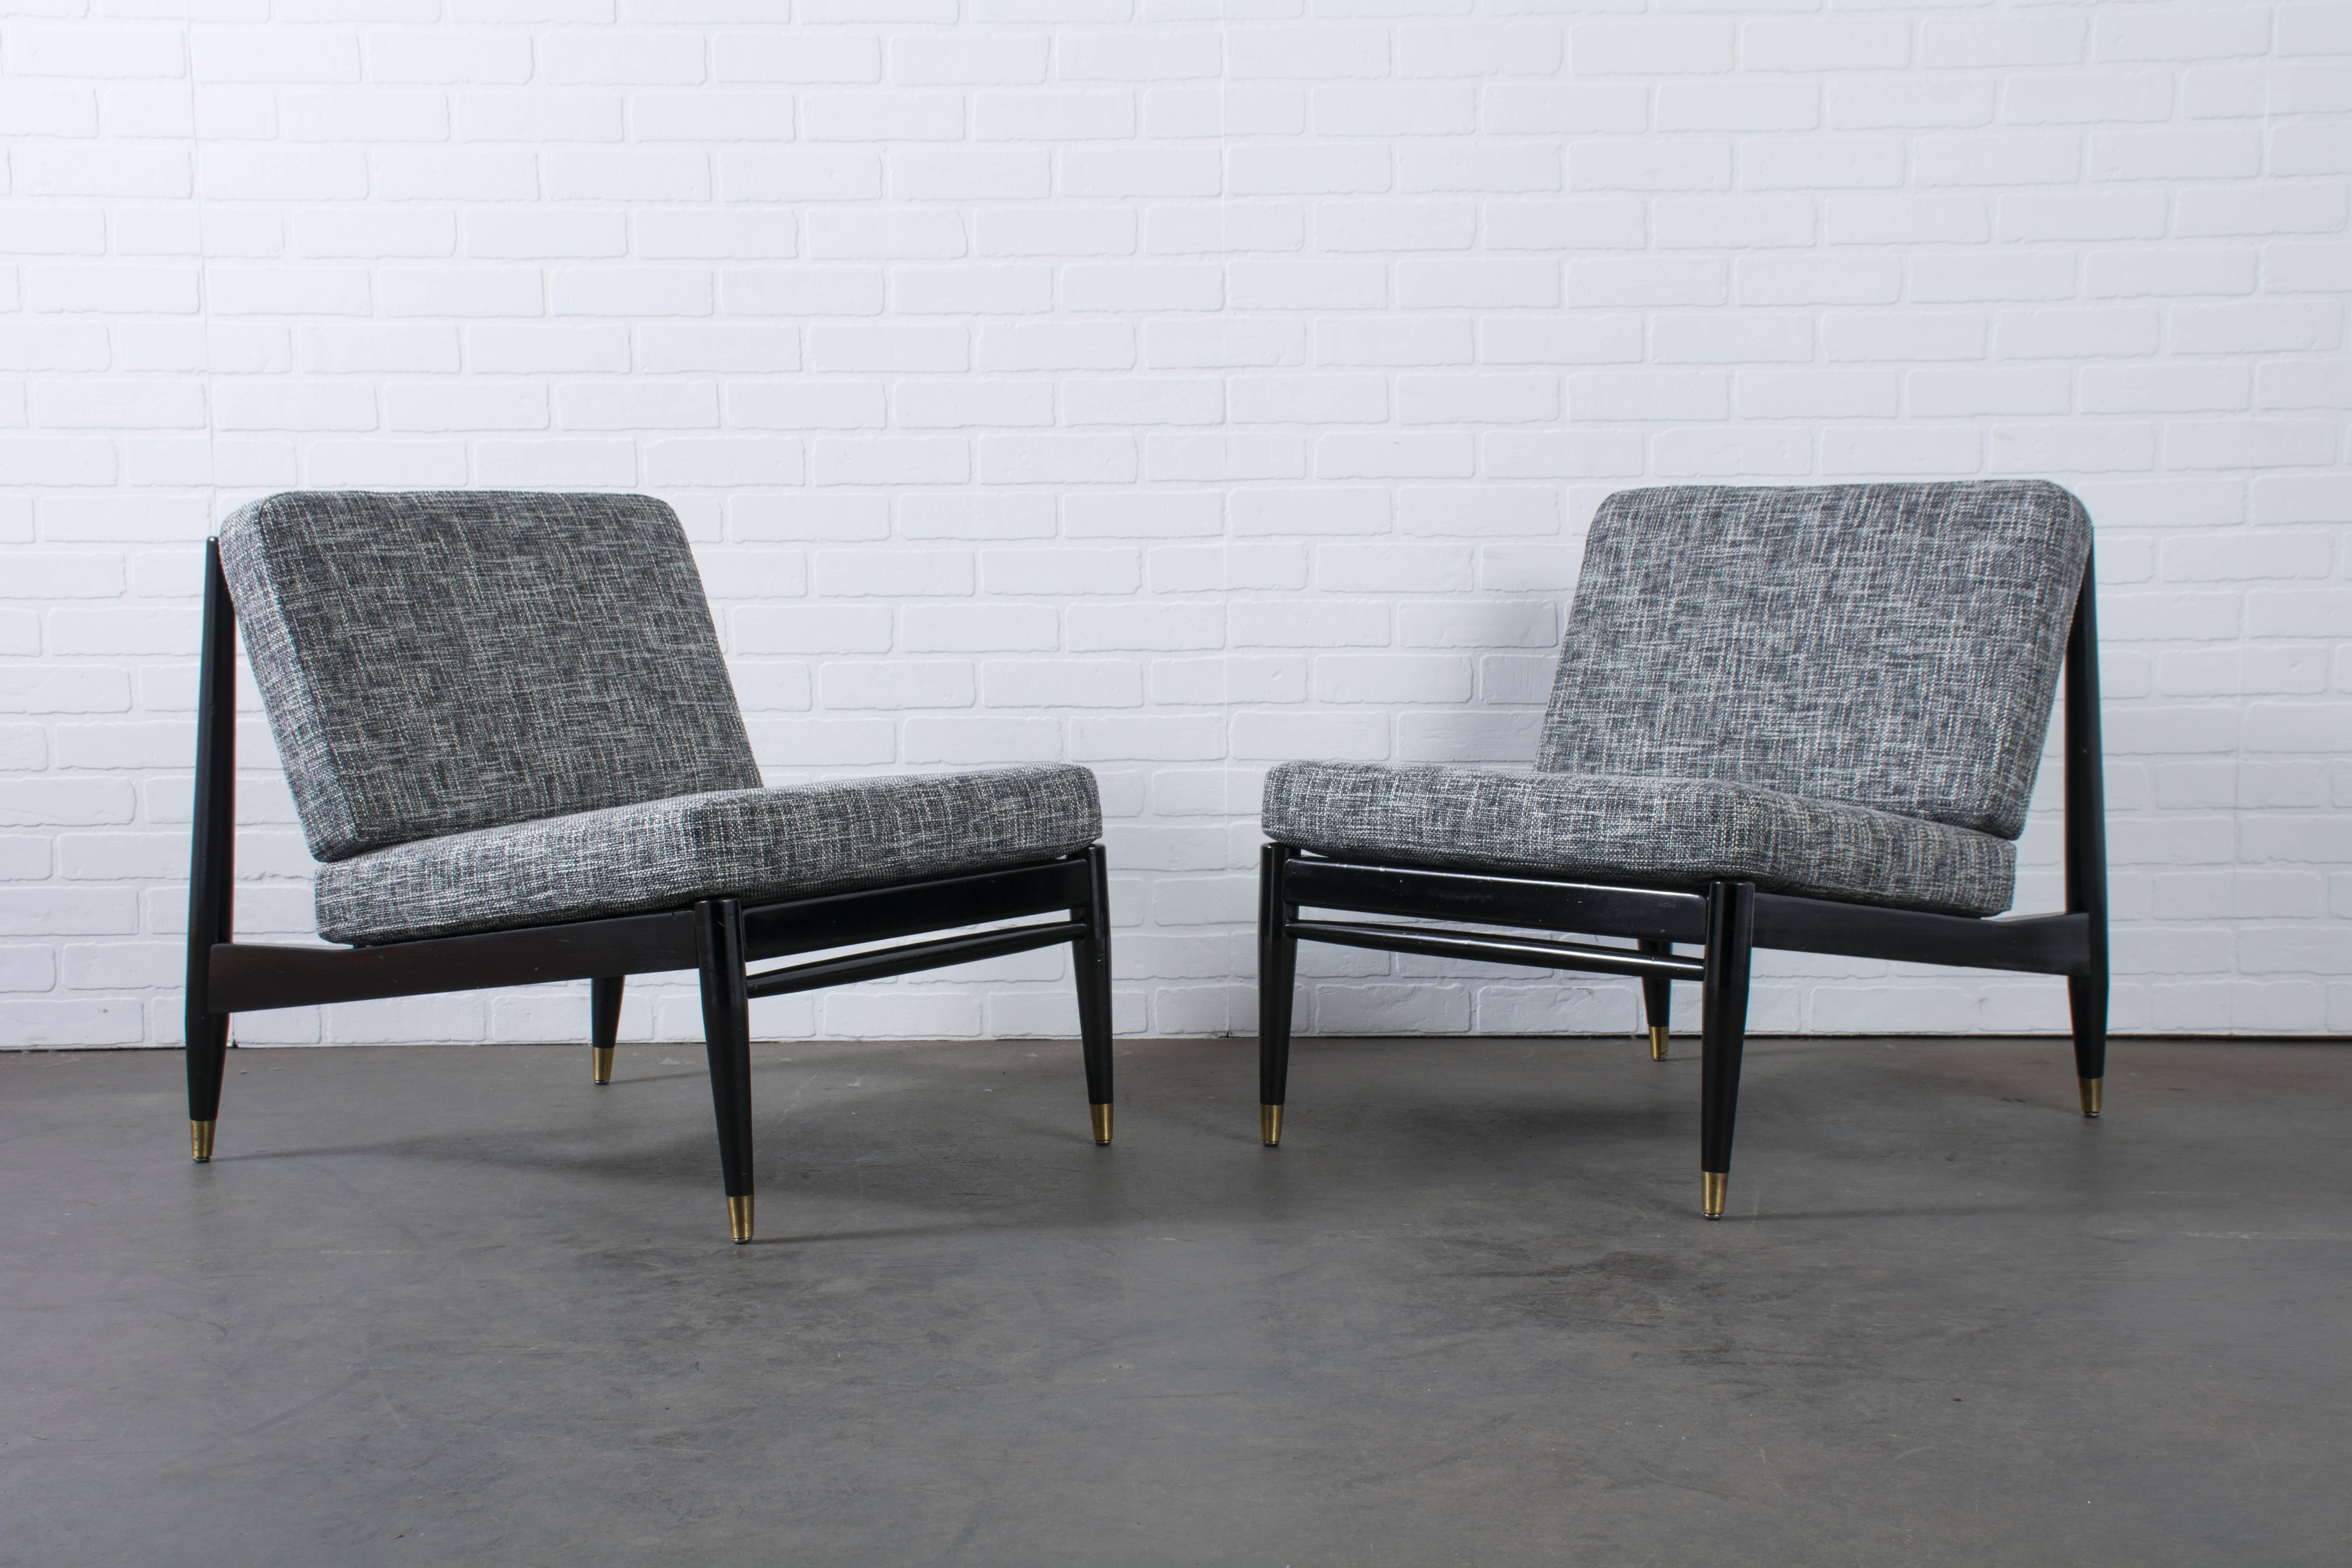 This is a pair of vintage Mid-Century lounge chairs with black frames, gold accents and new black/white upholstery.